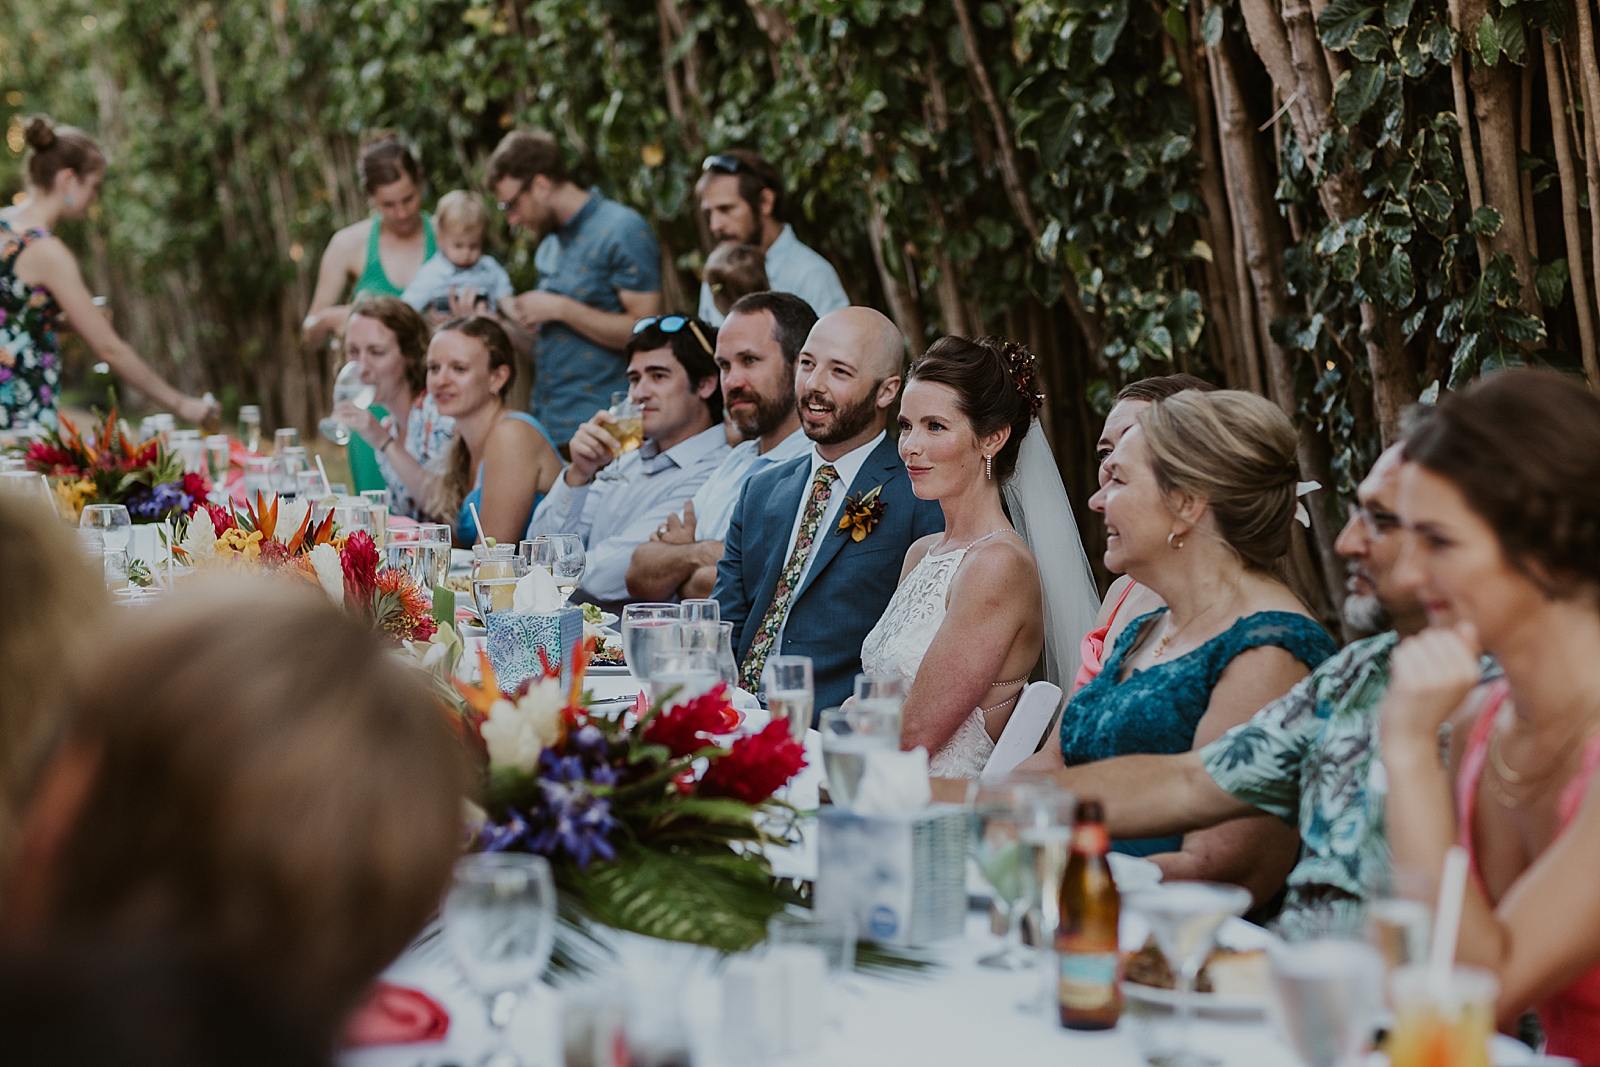 Shot of Bride and Groom sitting with guests at long Reception table